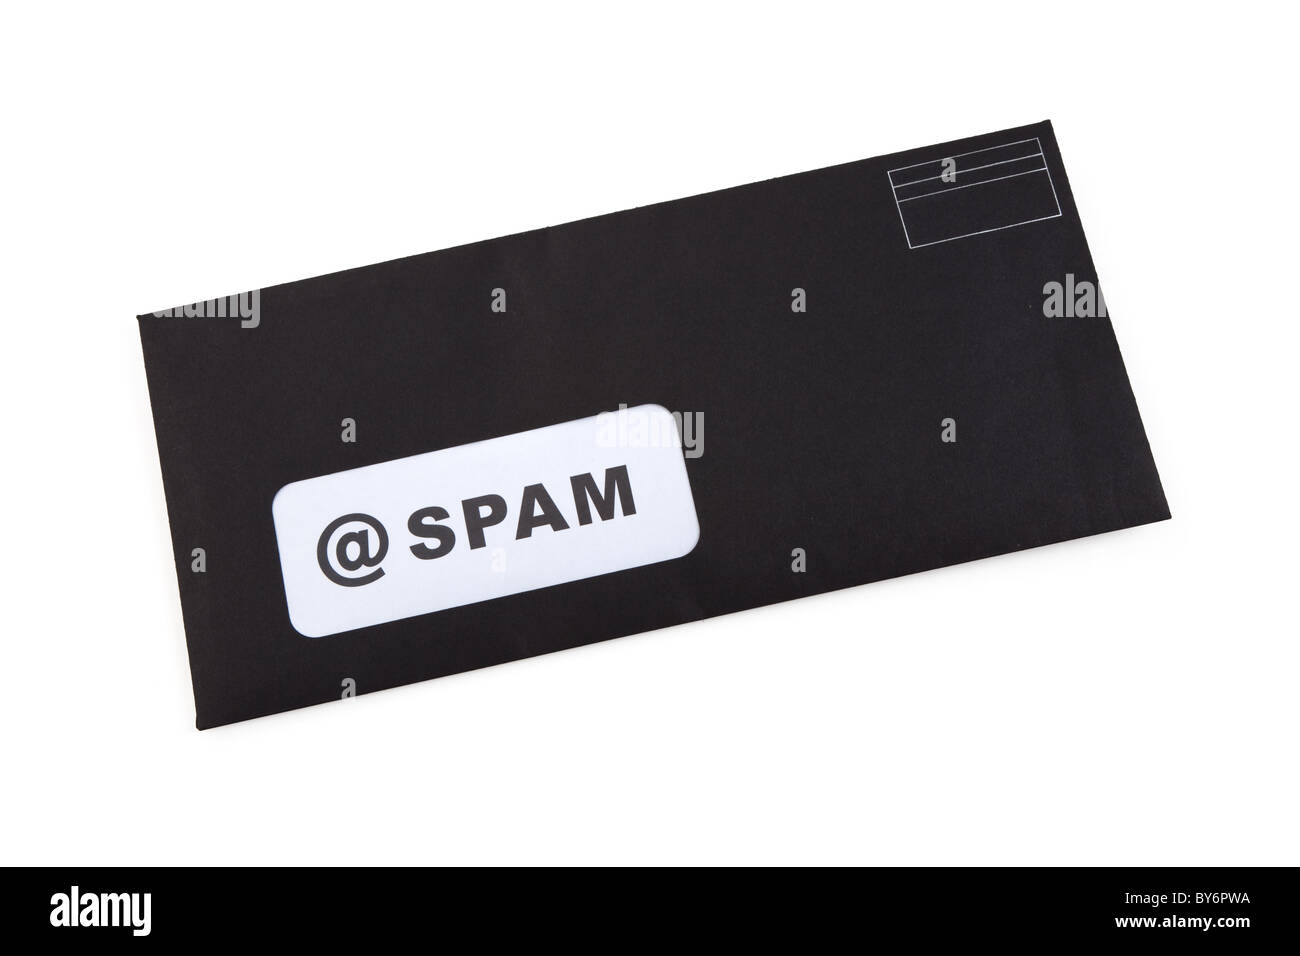 E-Mail SPAM, Concept internet security Stock Photo